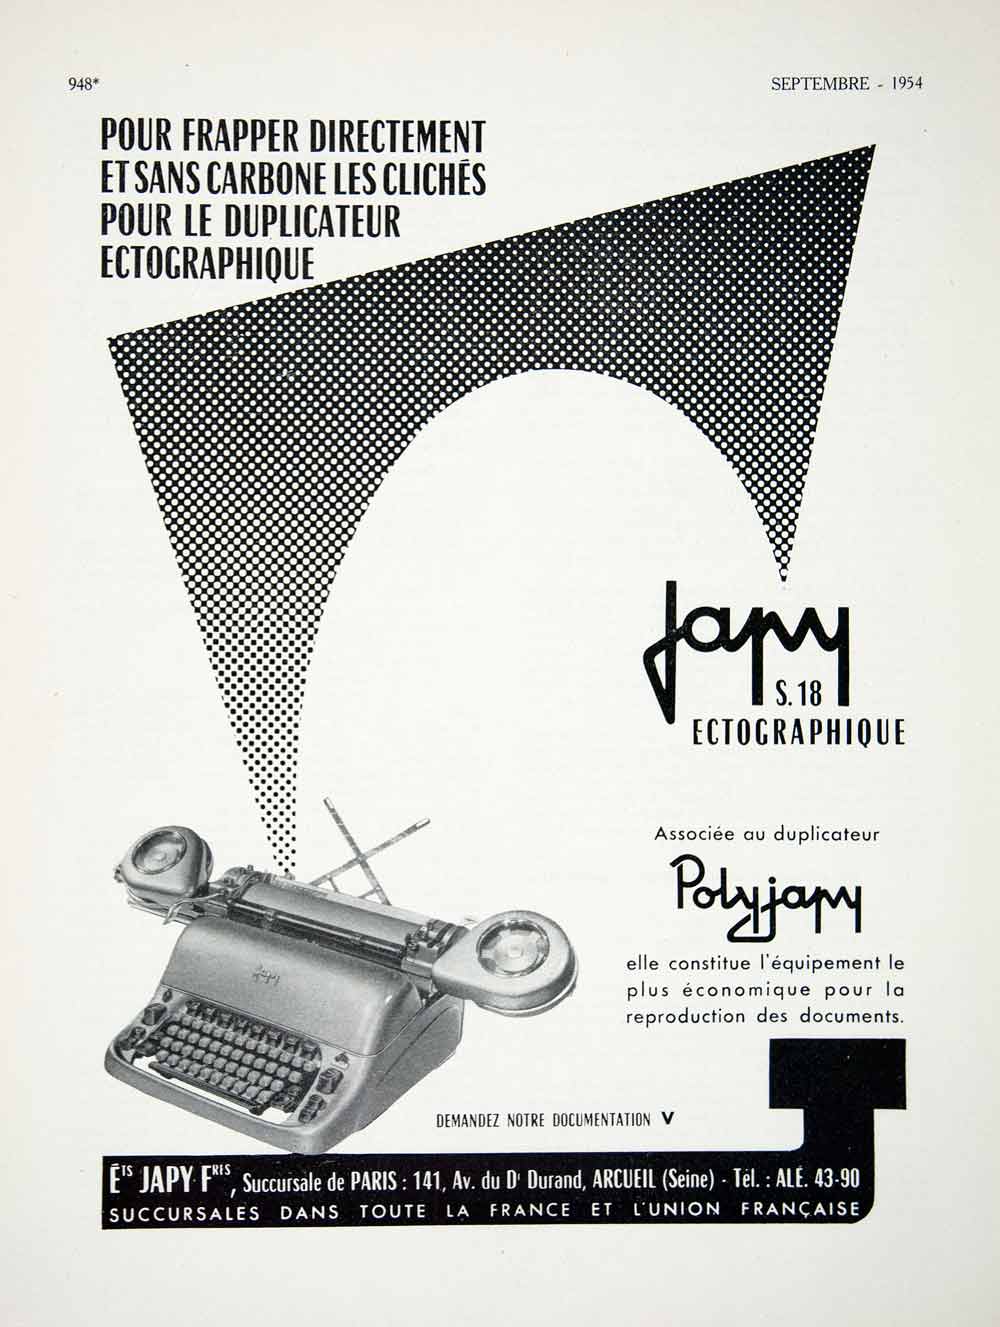 1954 Ad Japy Electric Typewriter Polyjapy 141 Avenue du Dr Durand Arcueil VEN8